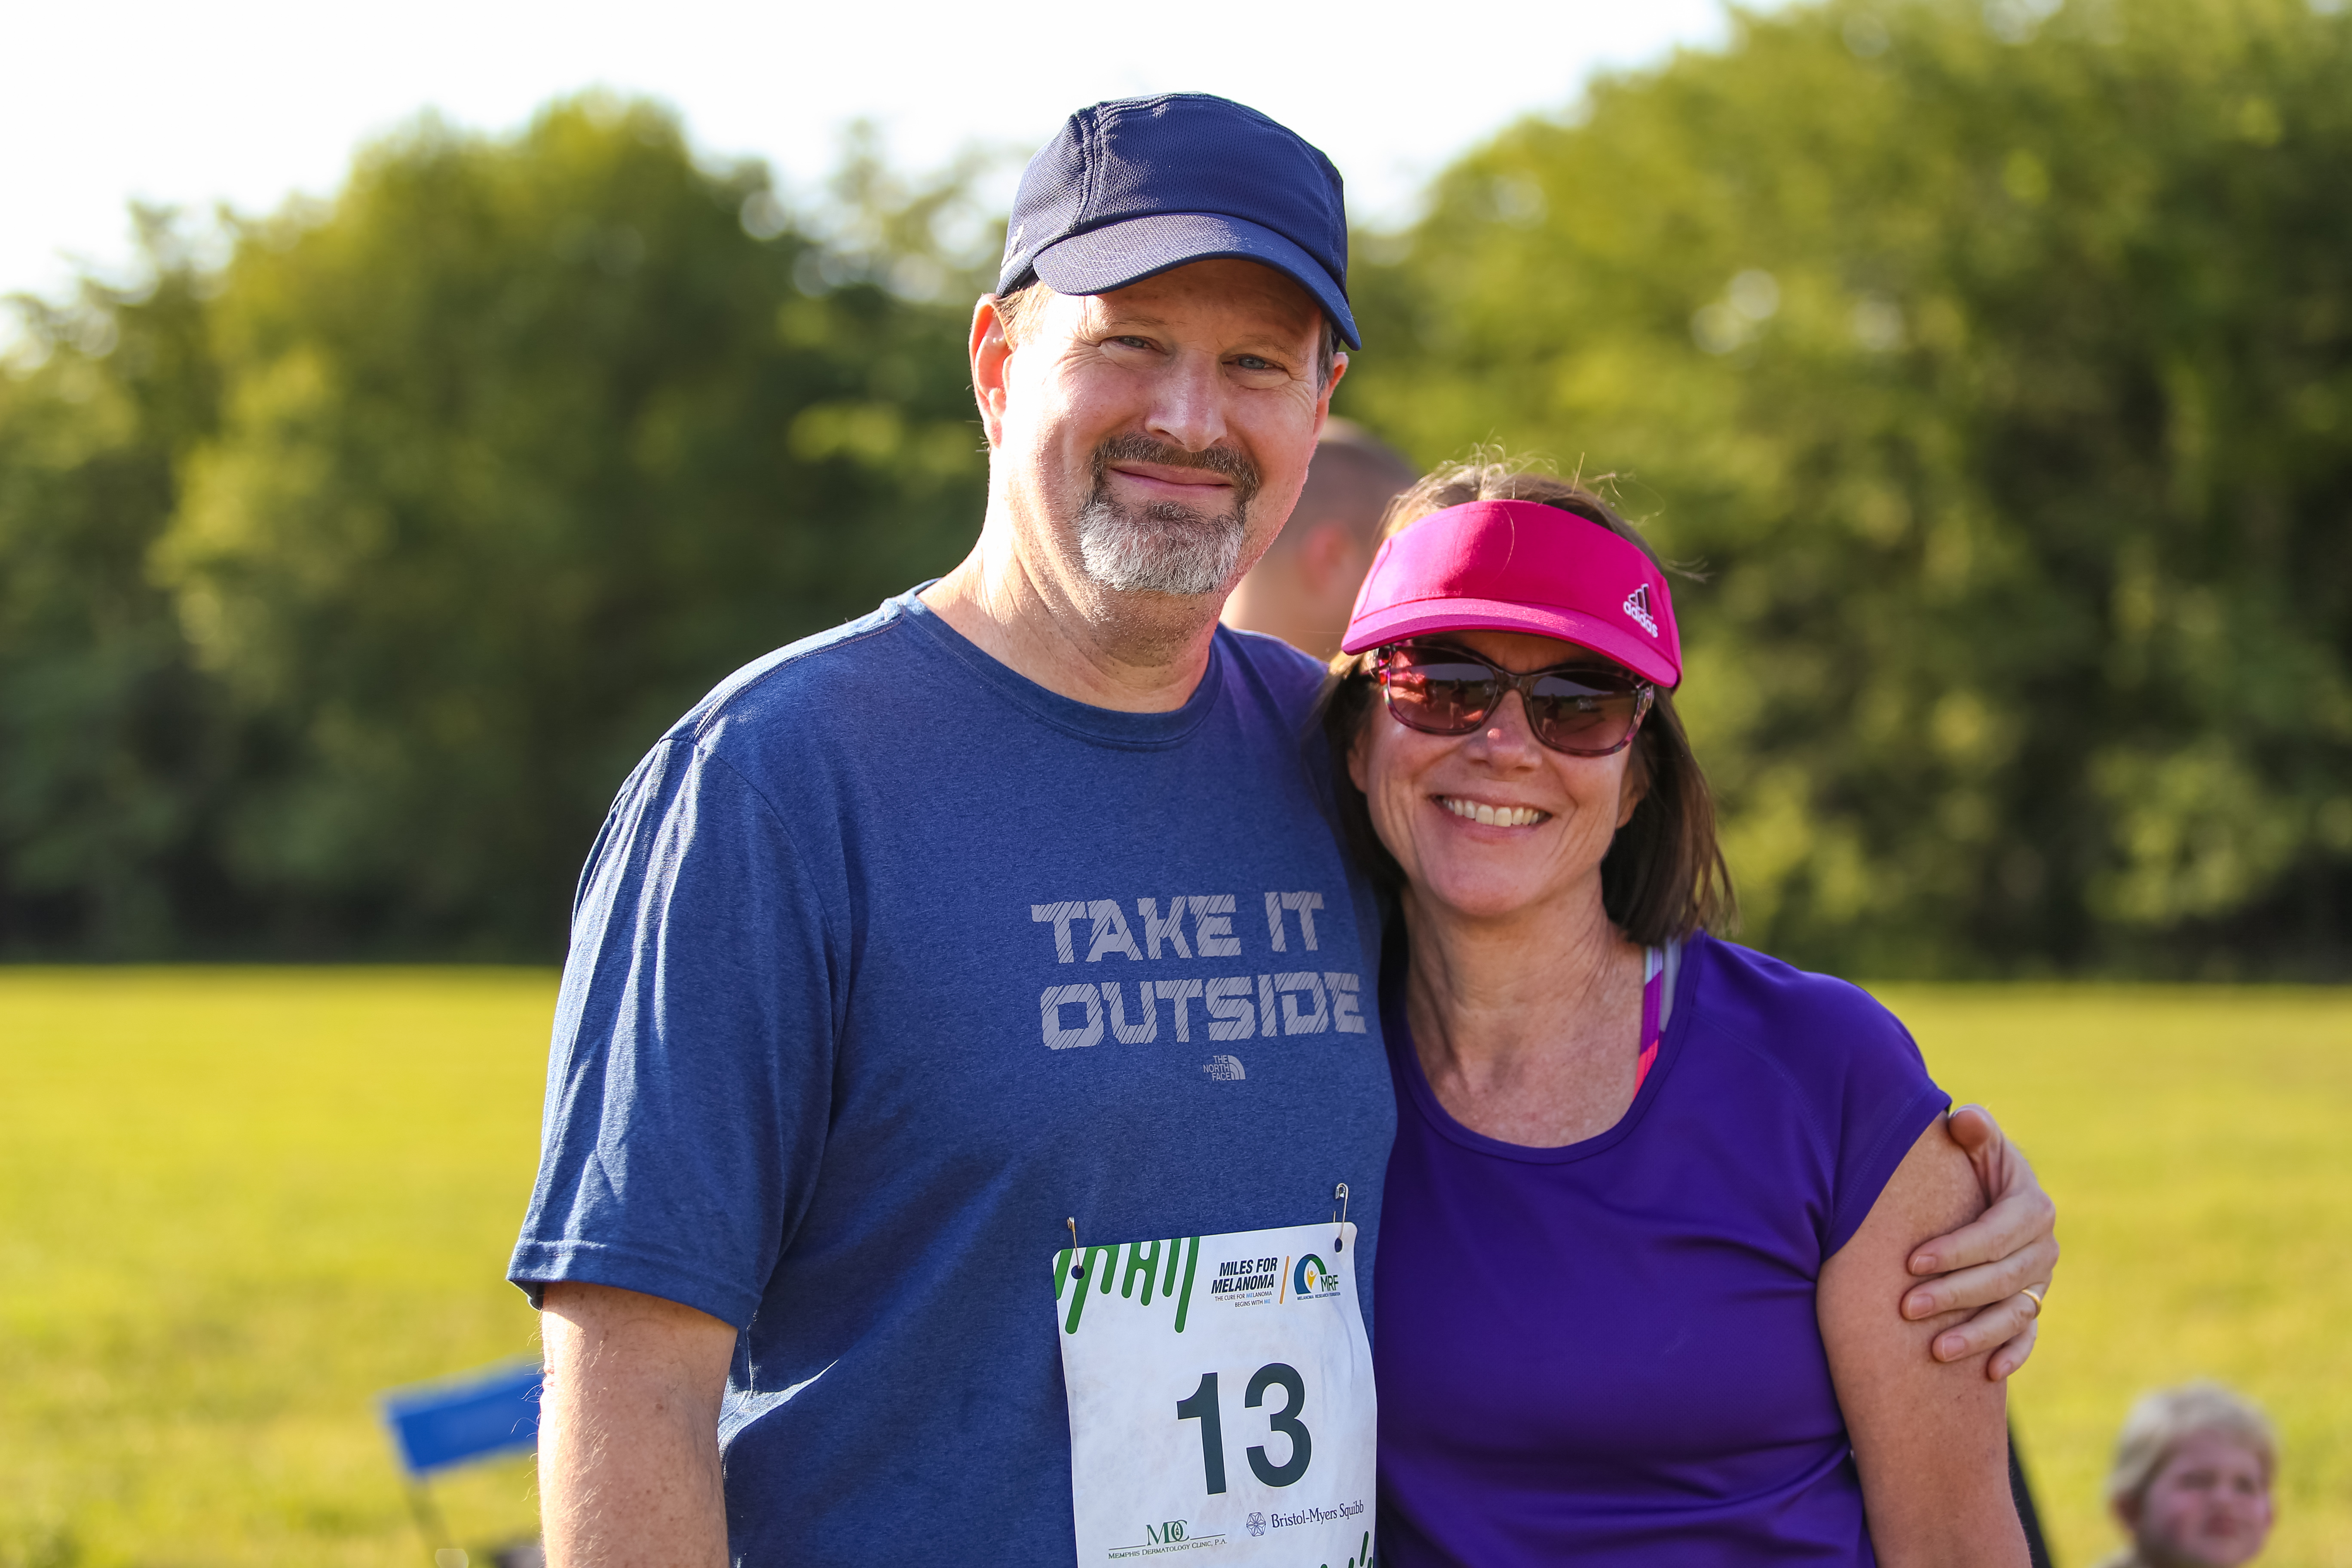 The author and his wife smiling in running clothes